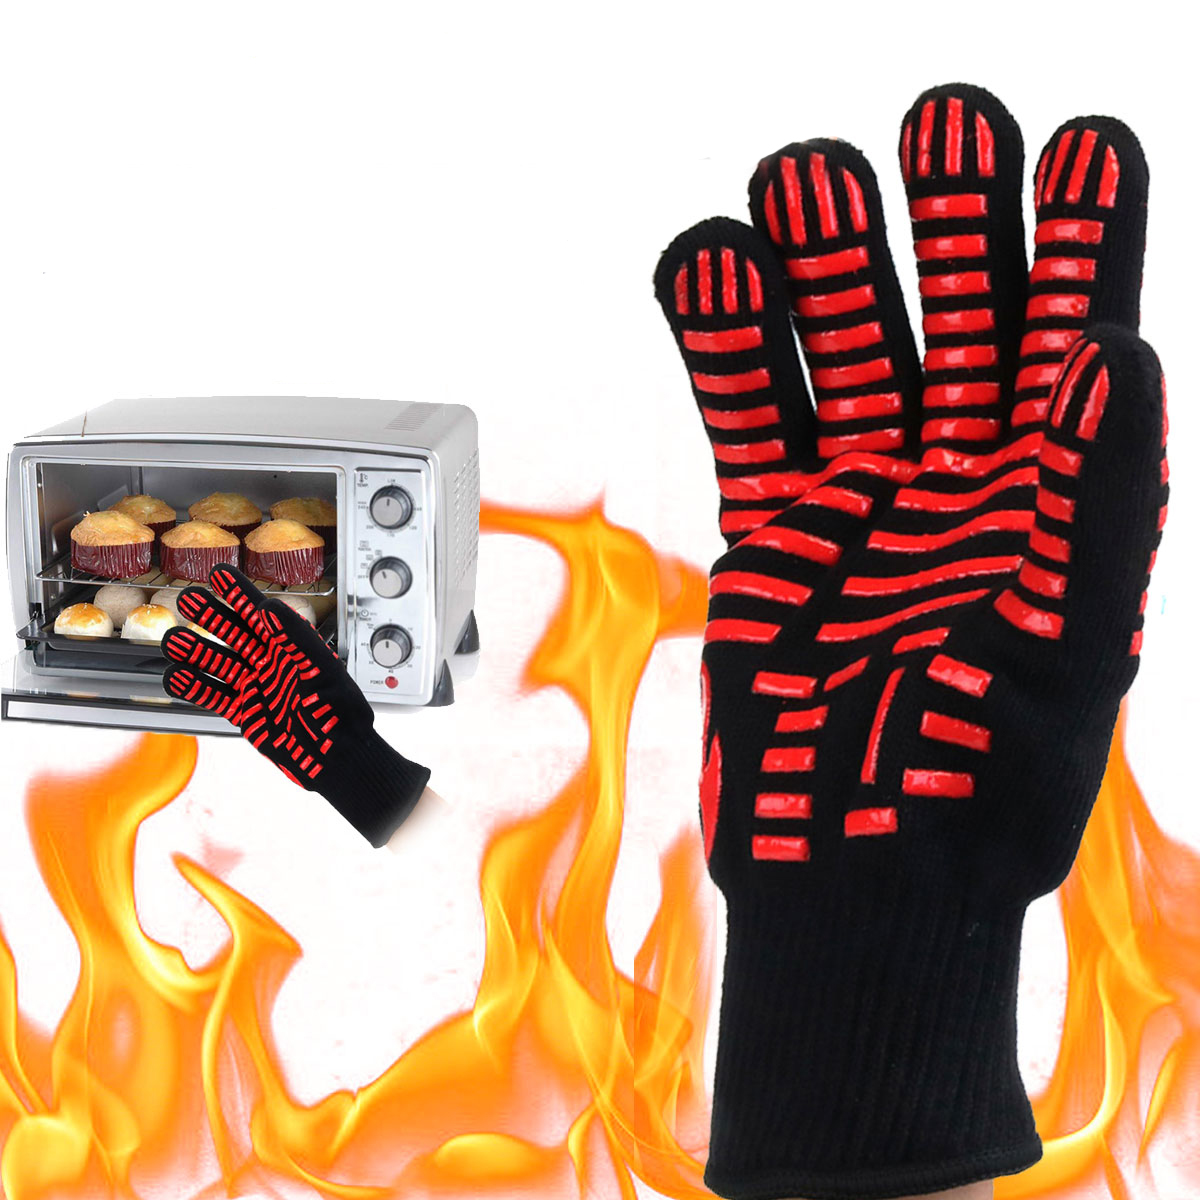 

BBQ Grill Glove 500℃ Extreme Heat Resistant Gloves Cooking Baking Gloves Camping Picnic